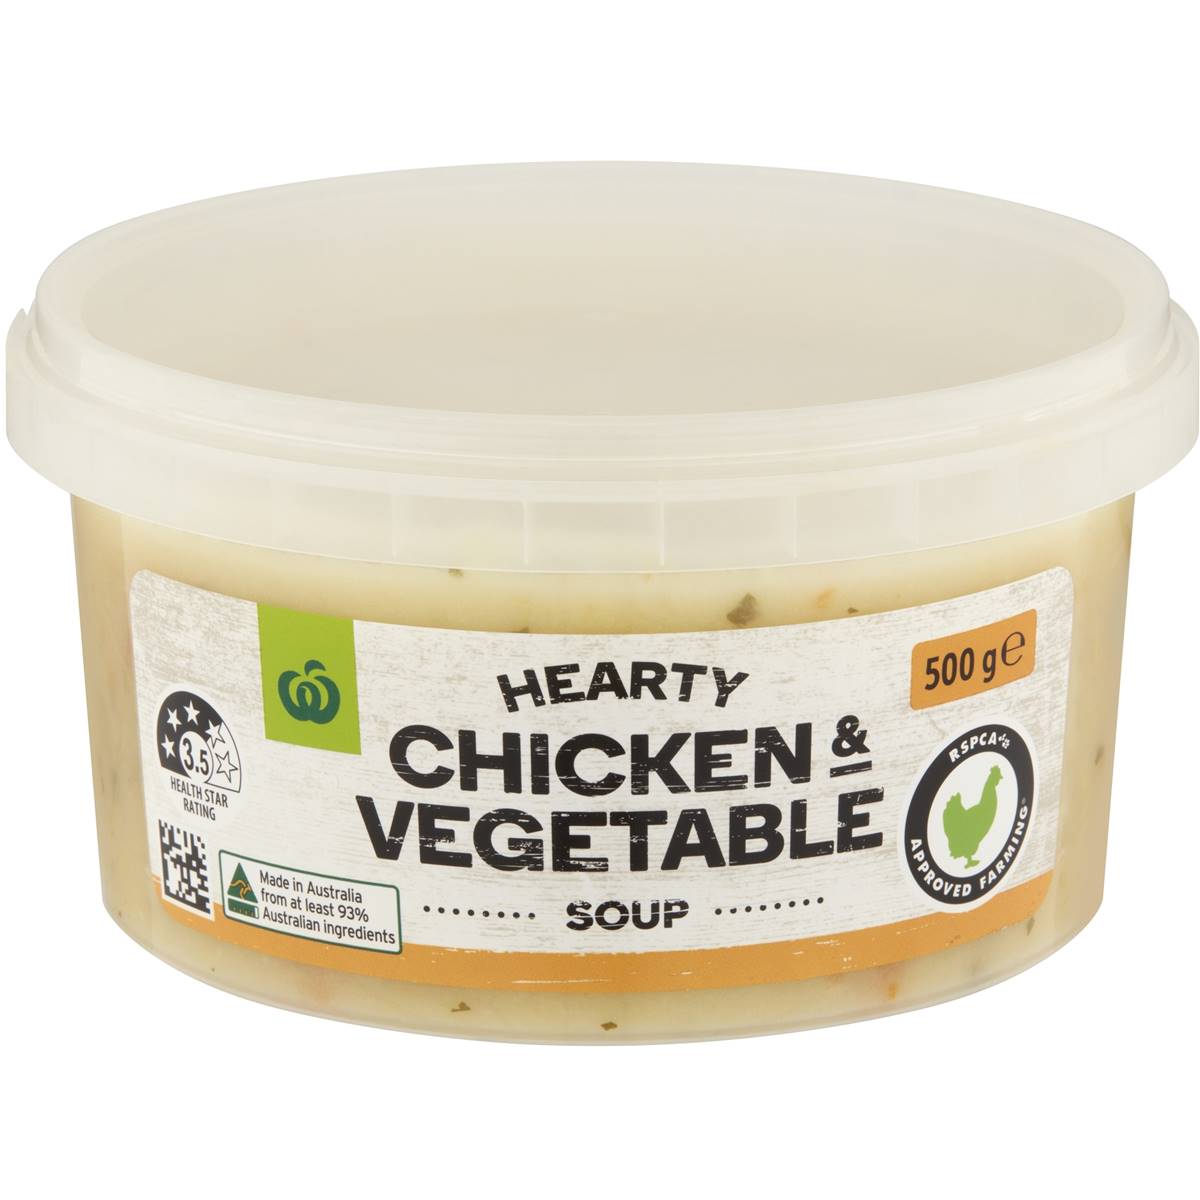 Calories in Woolworths Hearty Chicken & Vegetable Soup calcount